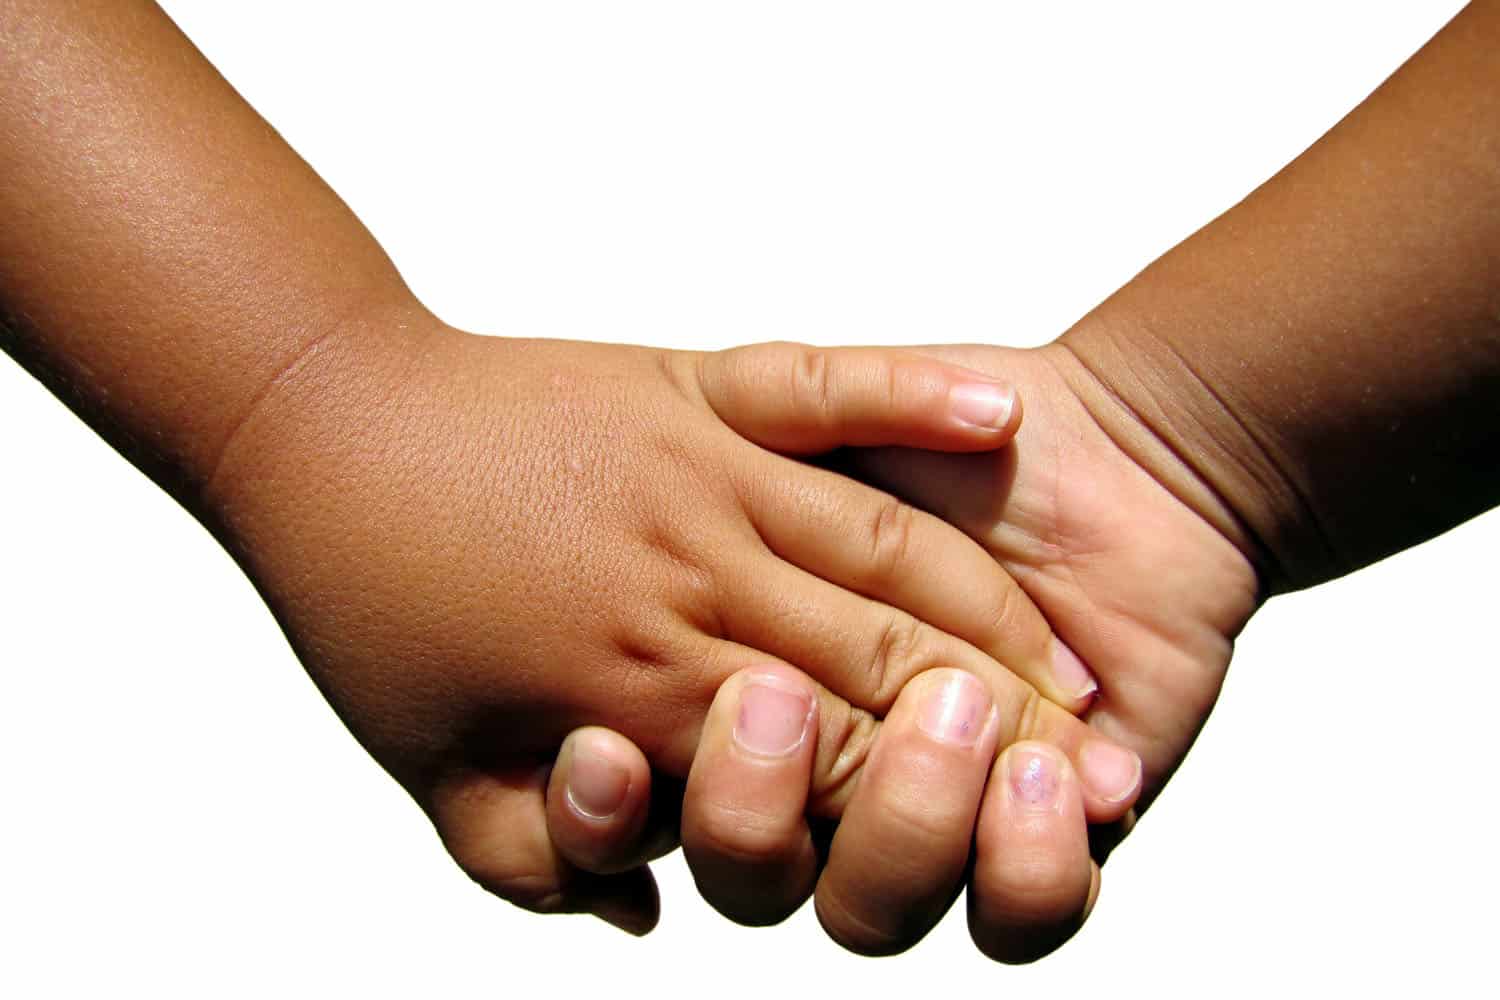 Holding hands showing friendship of two young children in childcare.